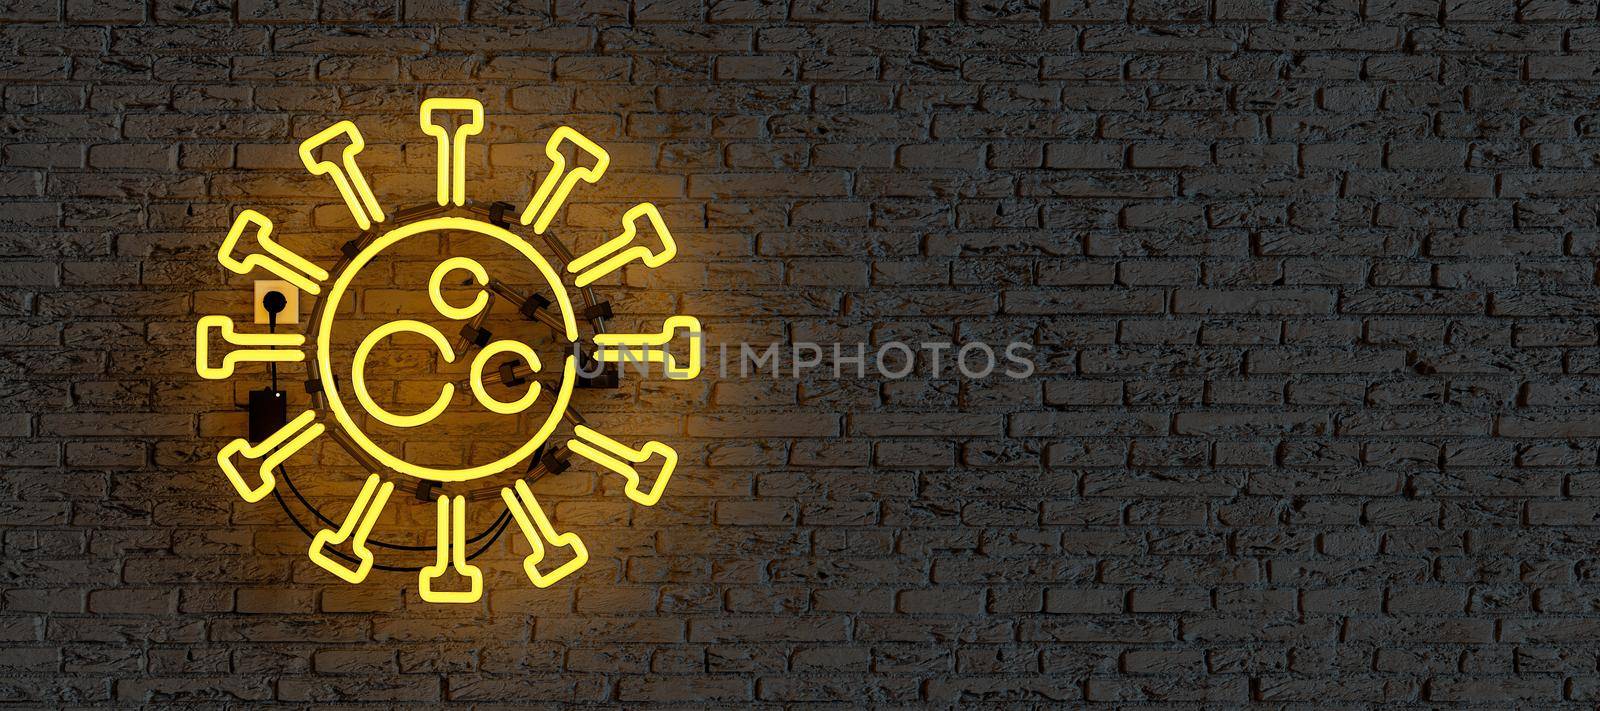 neon with COVID logo illuminated on brick wall with copyspace by asolano